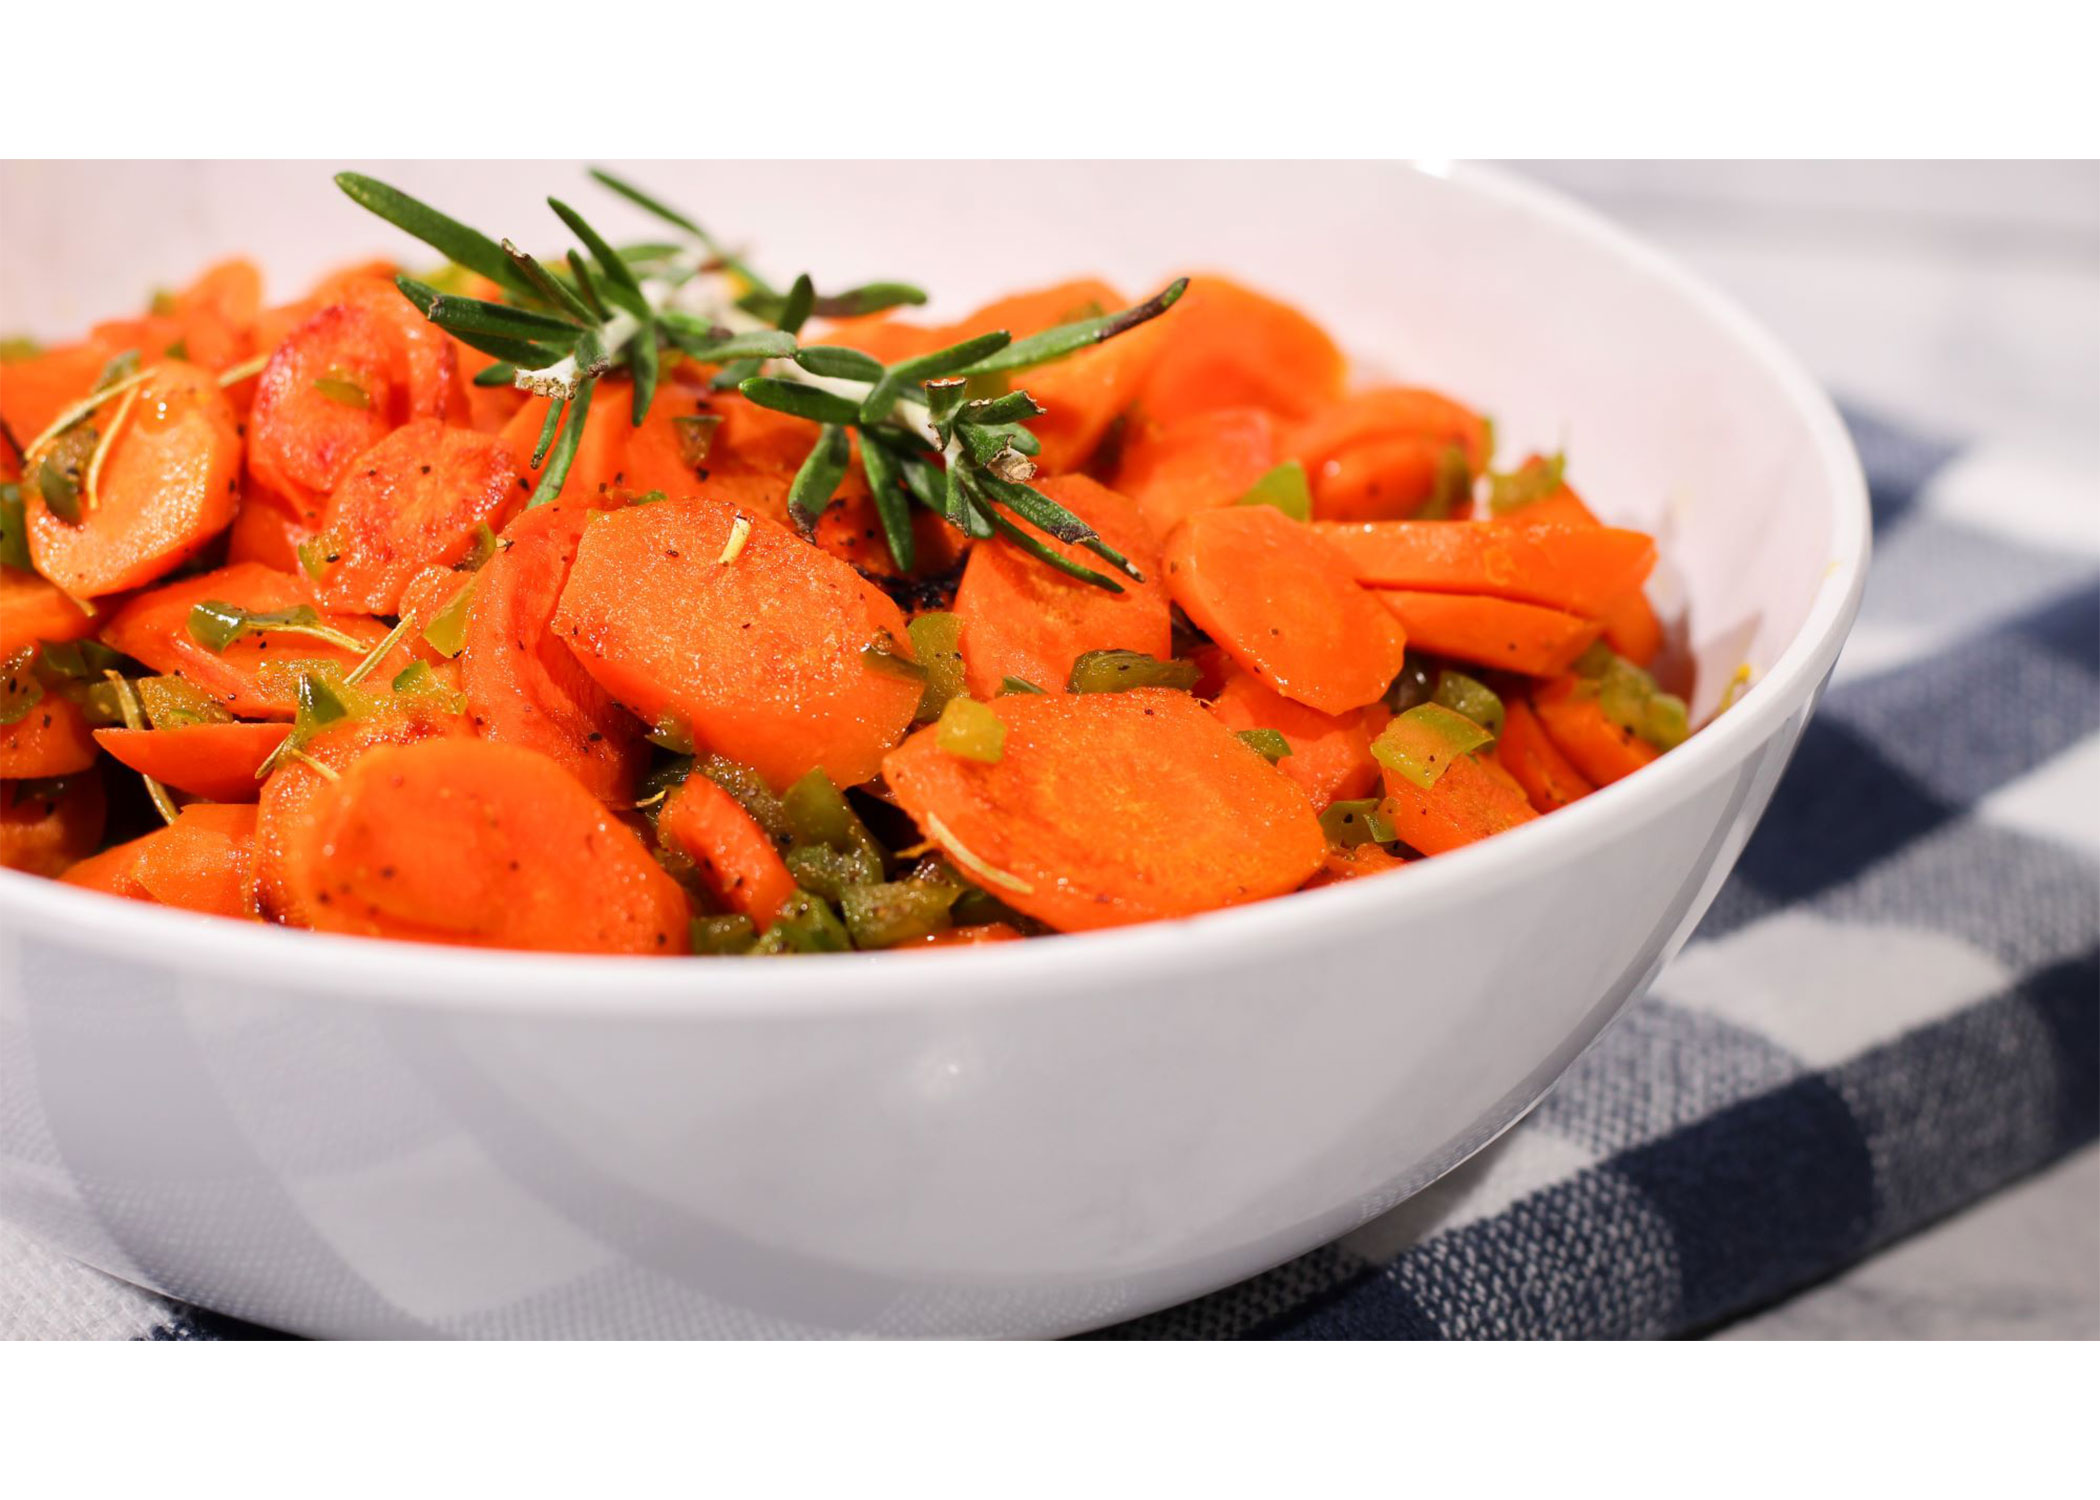 carrots with rosemary sprig in a bowl